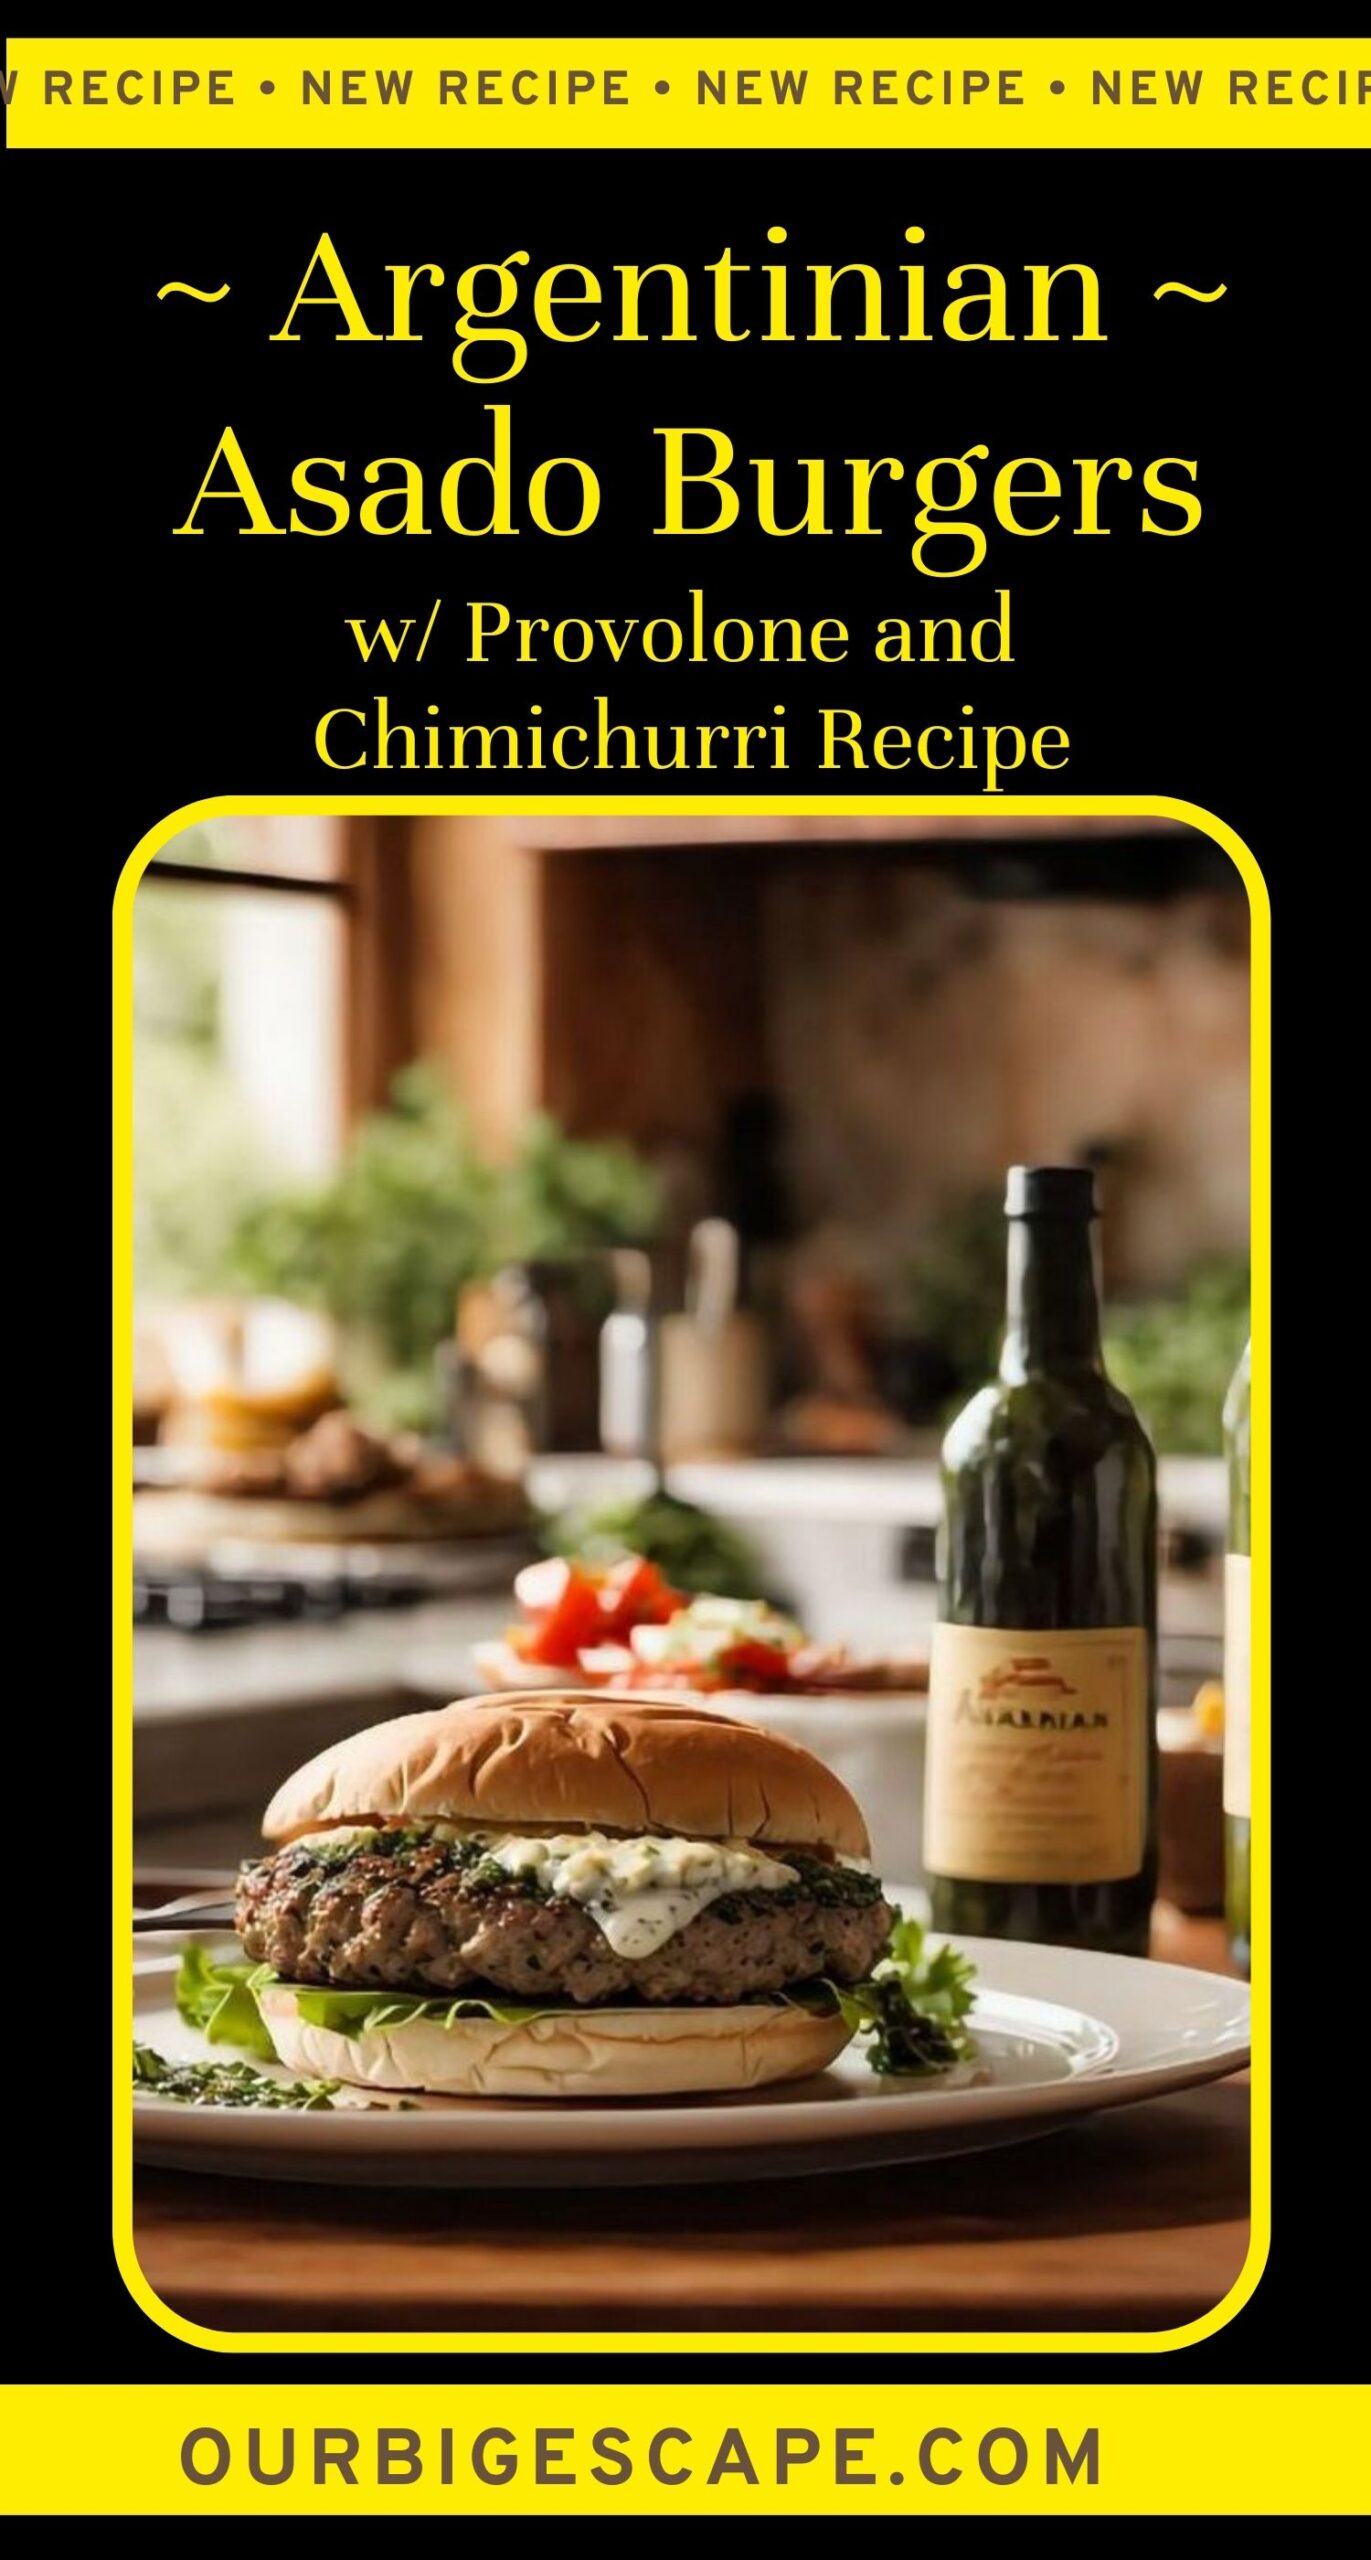 20. Argentinian Asado Burgers With Provolone and Chimichurri Recipe